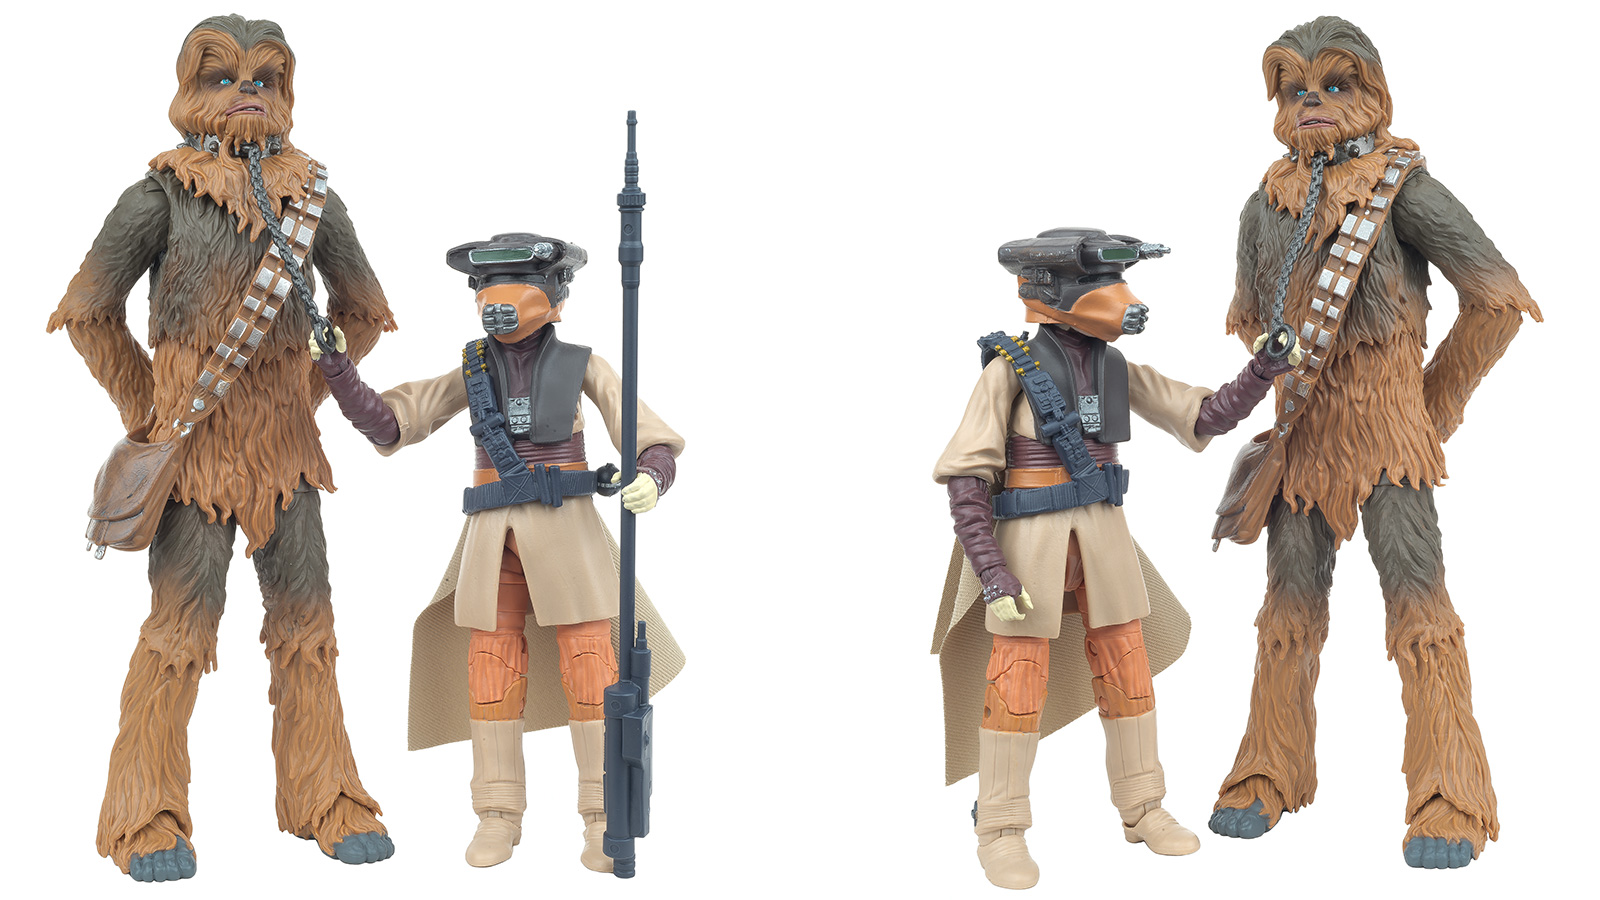 New Quick Pics - The Black Series 6-Inch Princess Leia (Boushh) With Chewbacca as Boushh’s Bounty